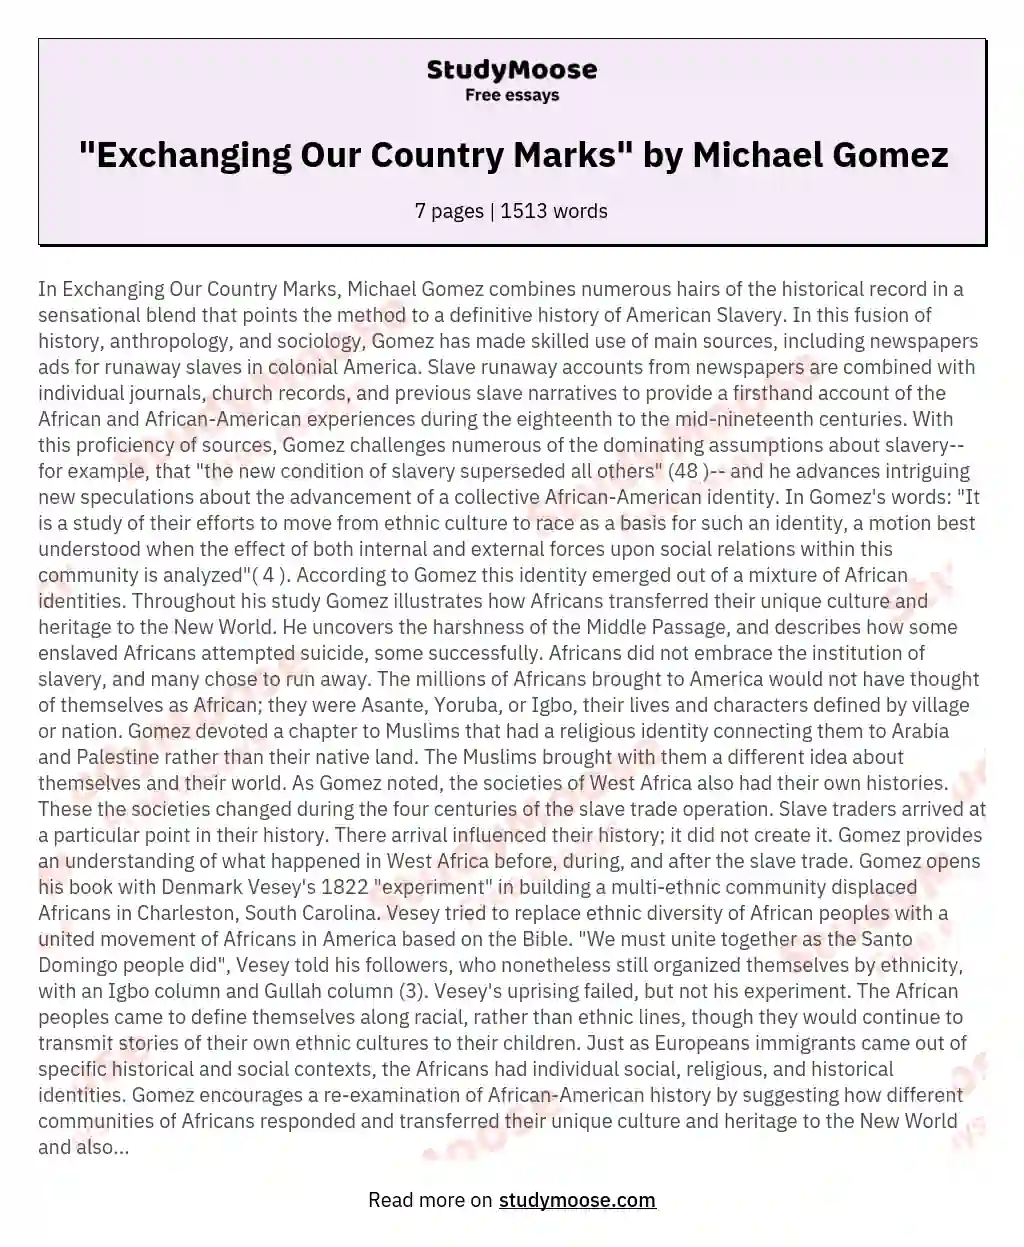 "Exchanging Our Country Marks" by Michael Gomez